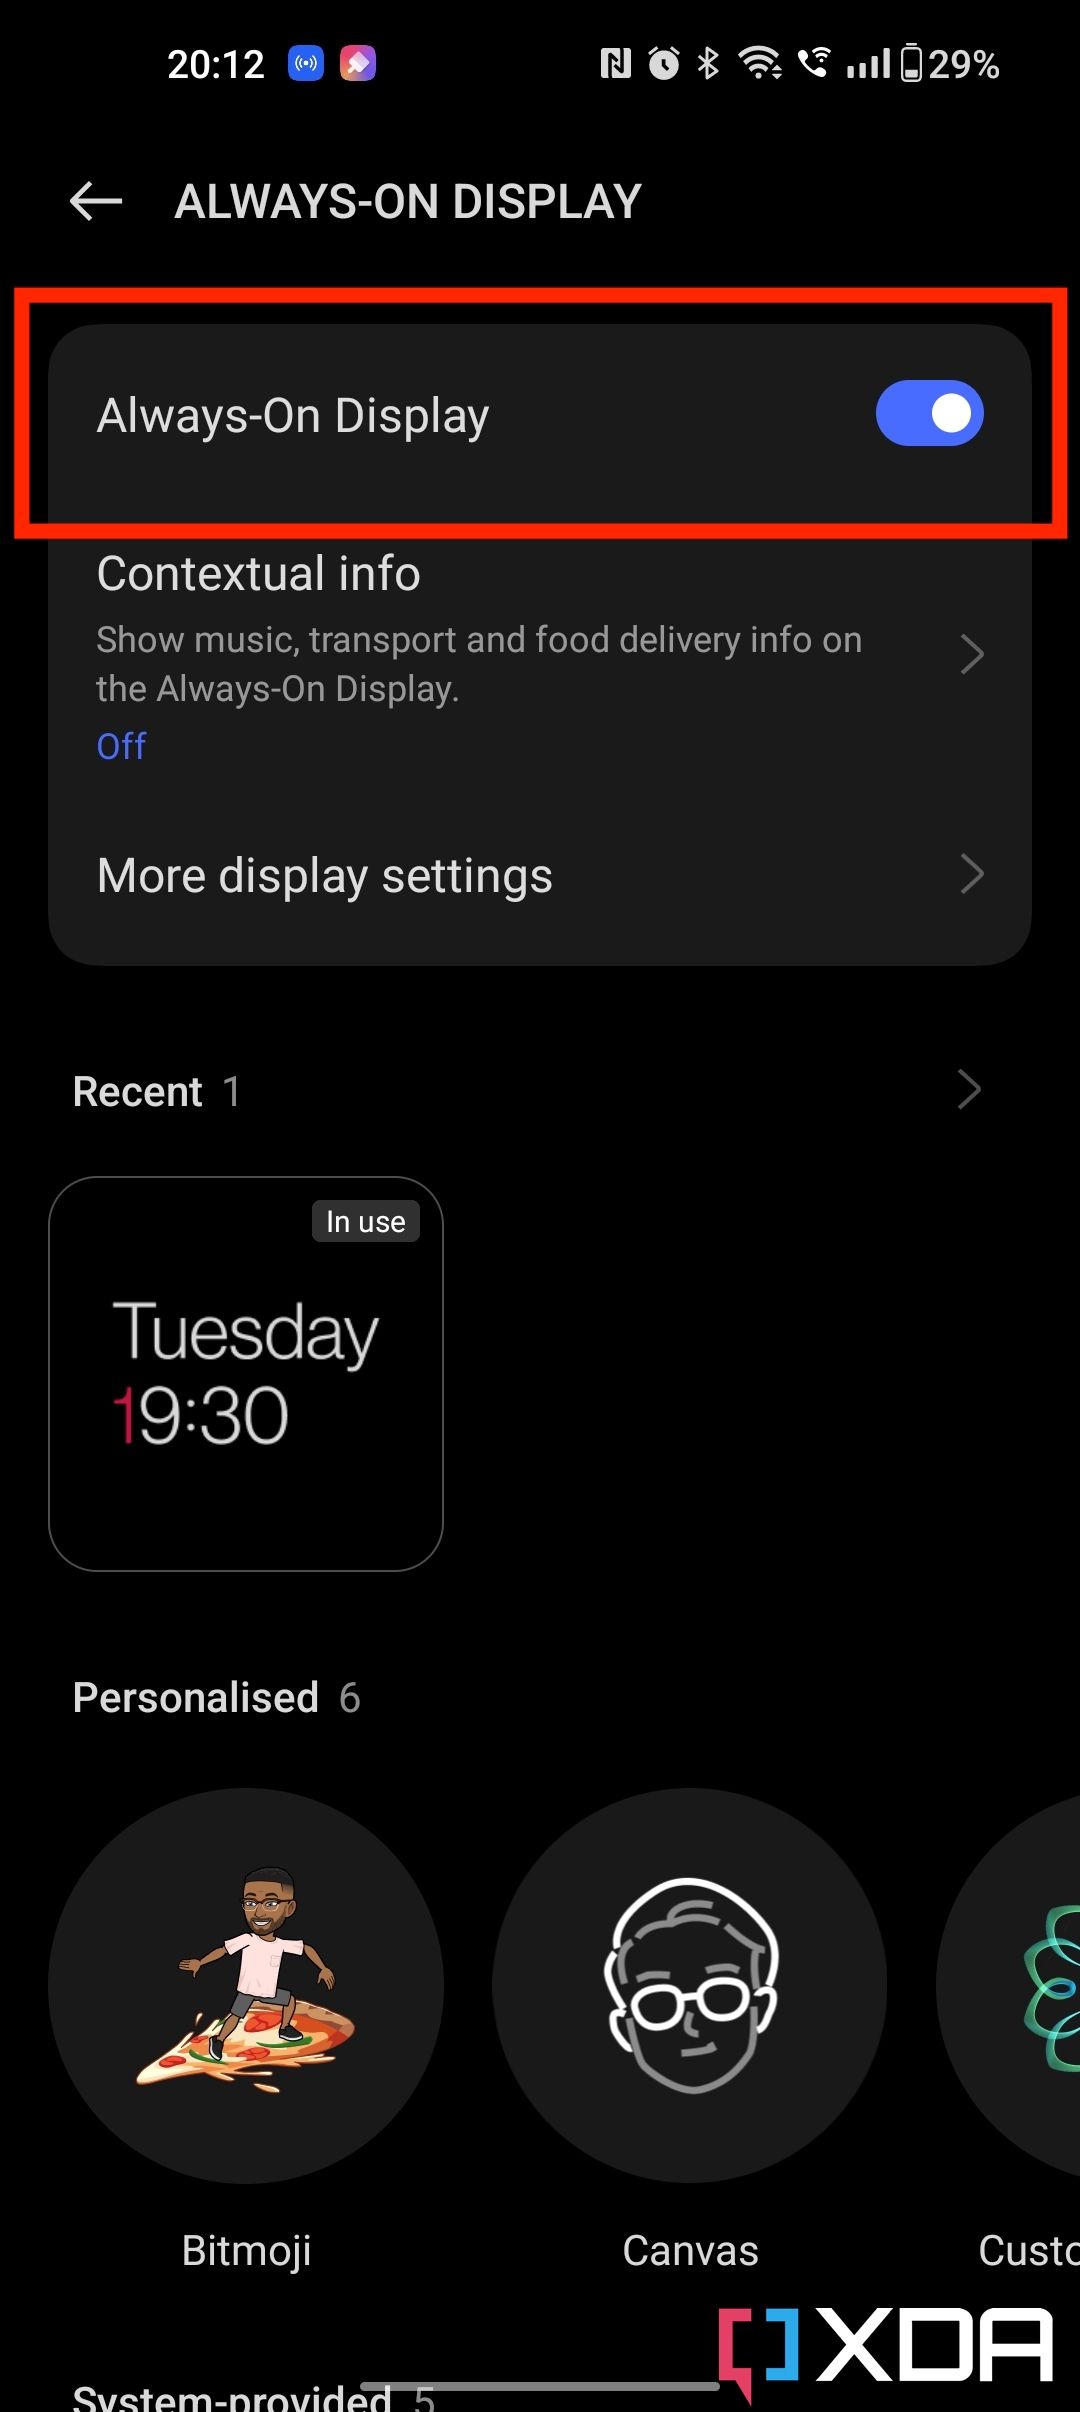 How to enable always-on display on any Android phone